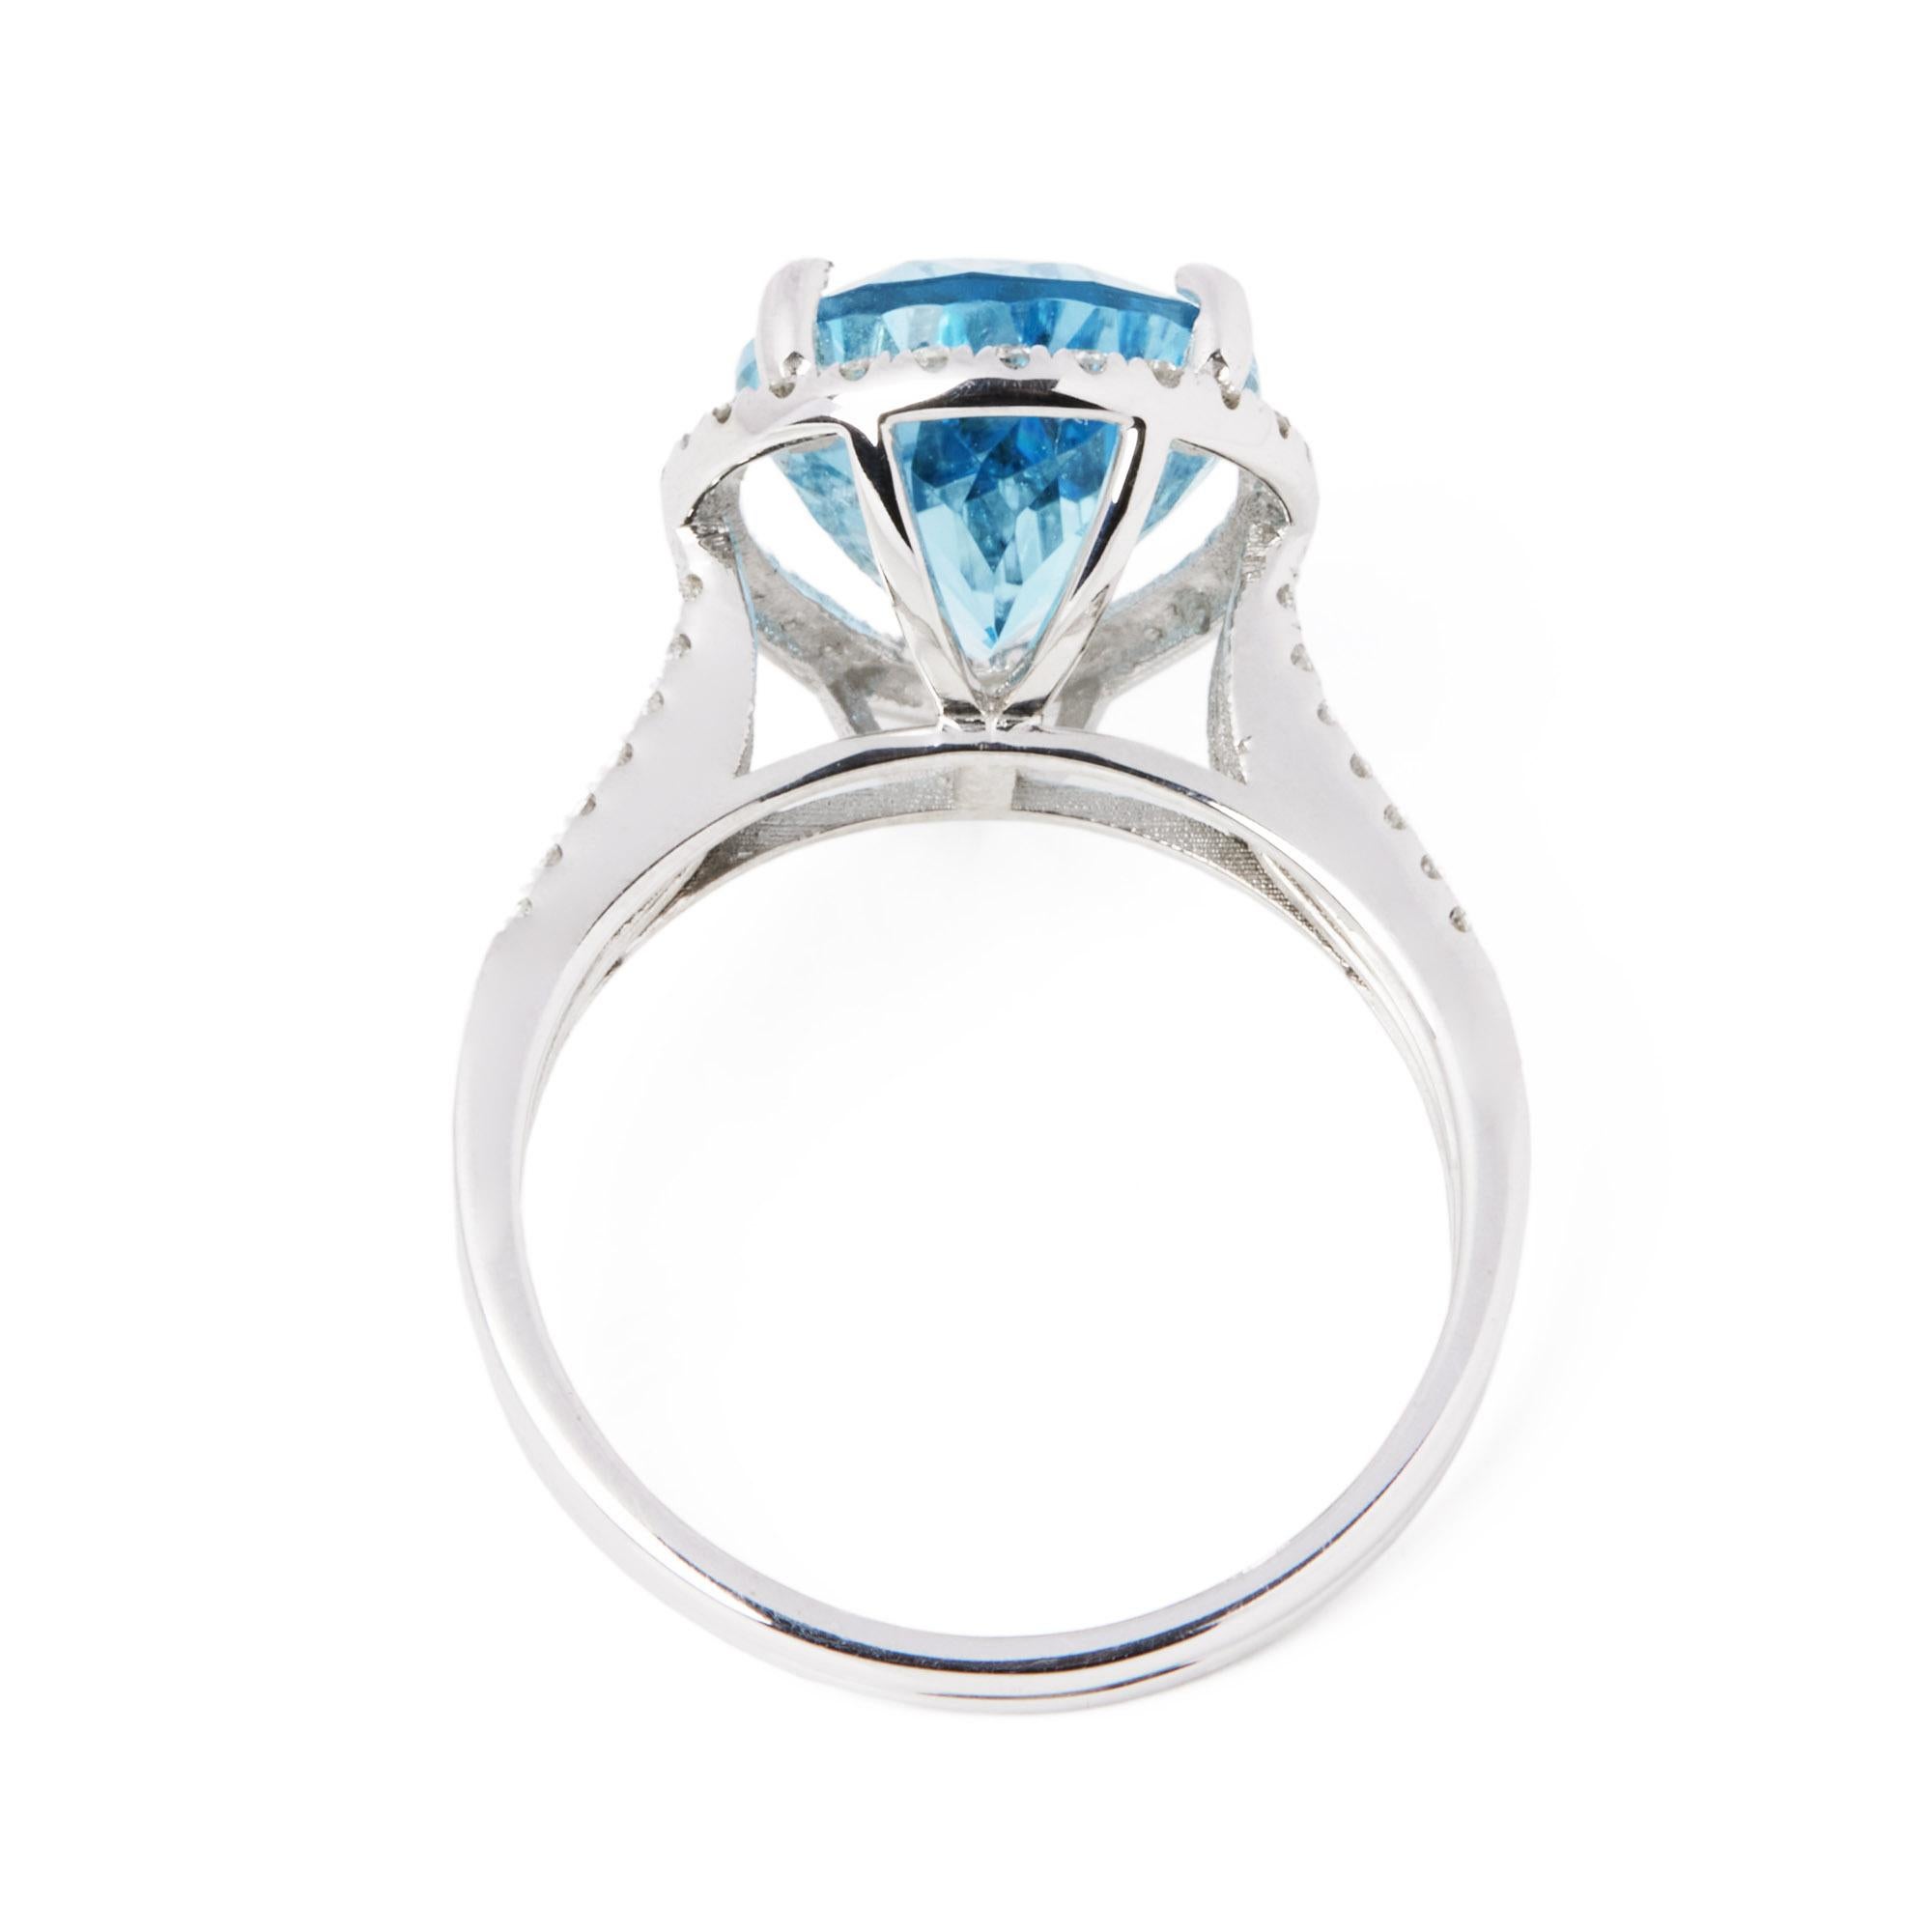 David Jerome Certified 4.77ct Pear Cut Aquamarine and Diamond Ring In New Condition For Sale In Bishop's Stortford, Hertfordshire